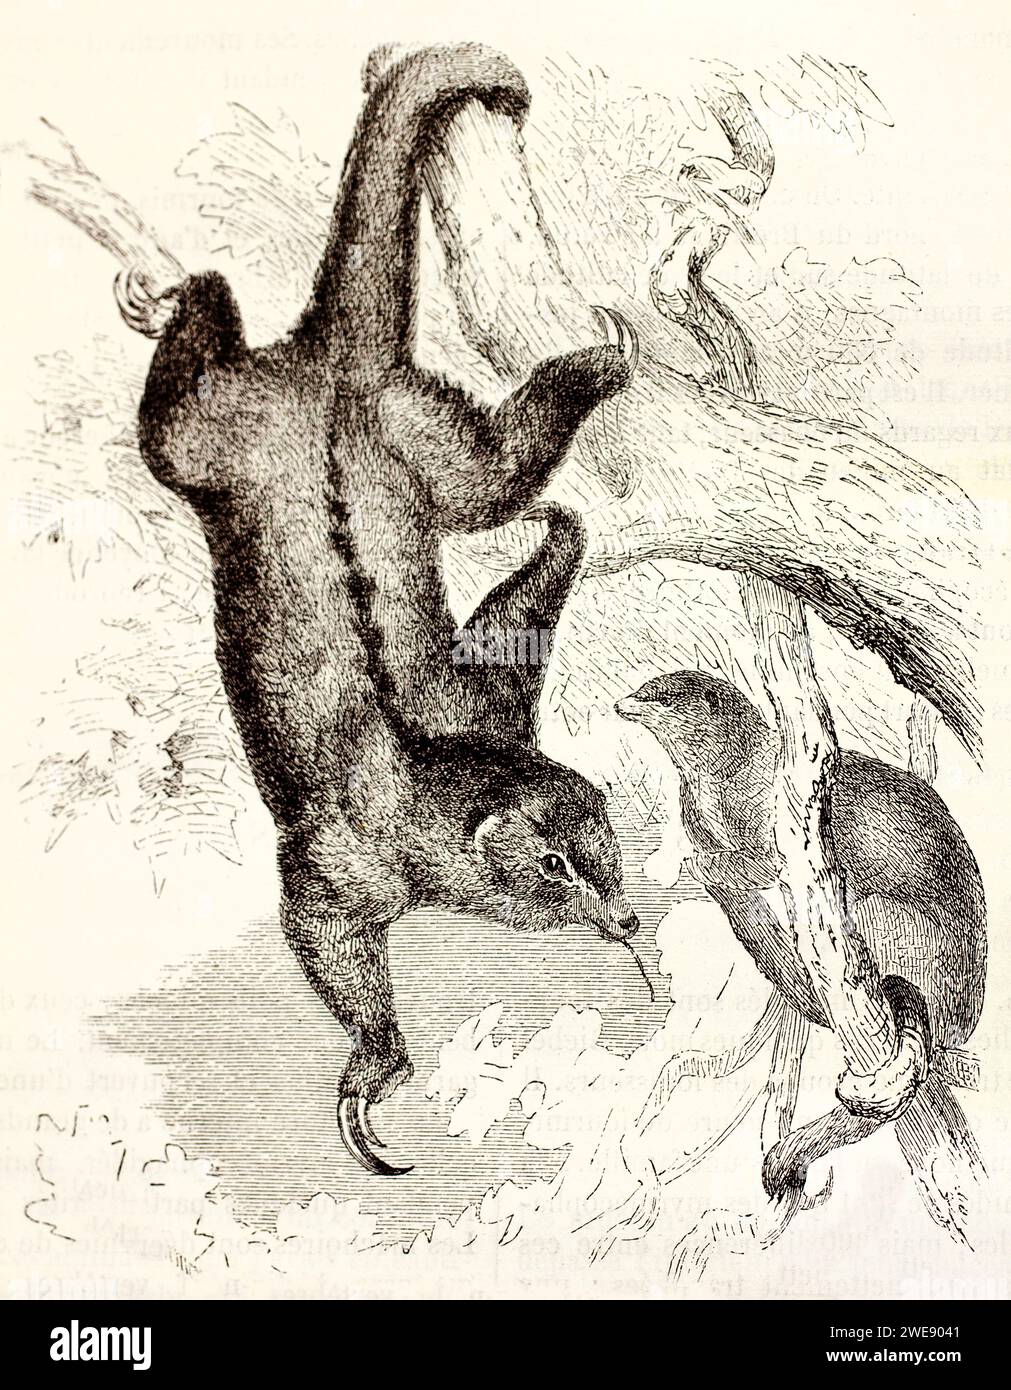 Old engraved illustration of Silky Anteater. Created by Kretschmer, published on Brehm, Les Mammifers, Baillière et fils, Paris, 1878 Stock Photo